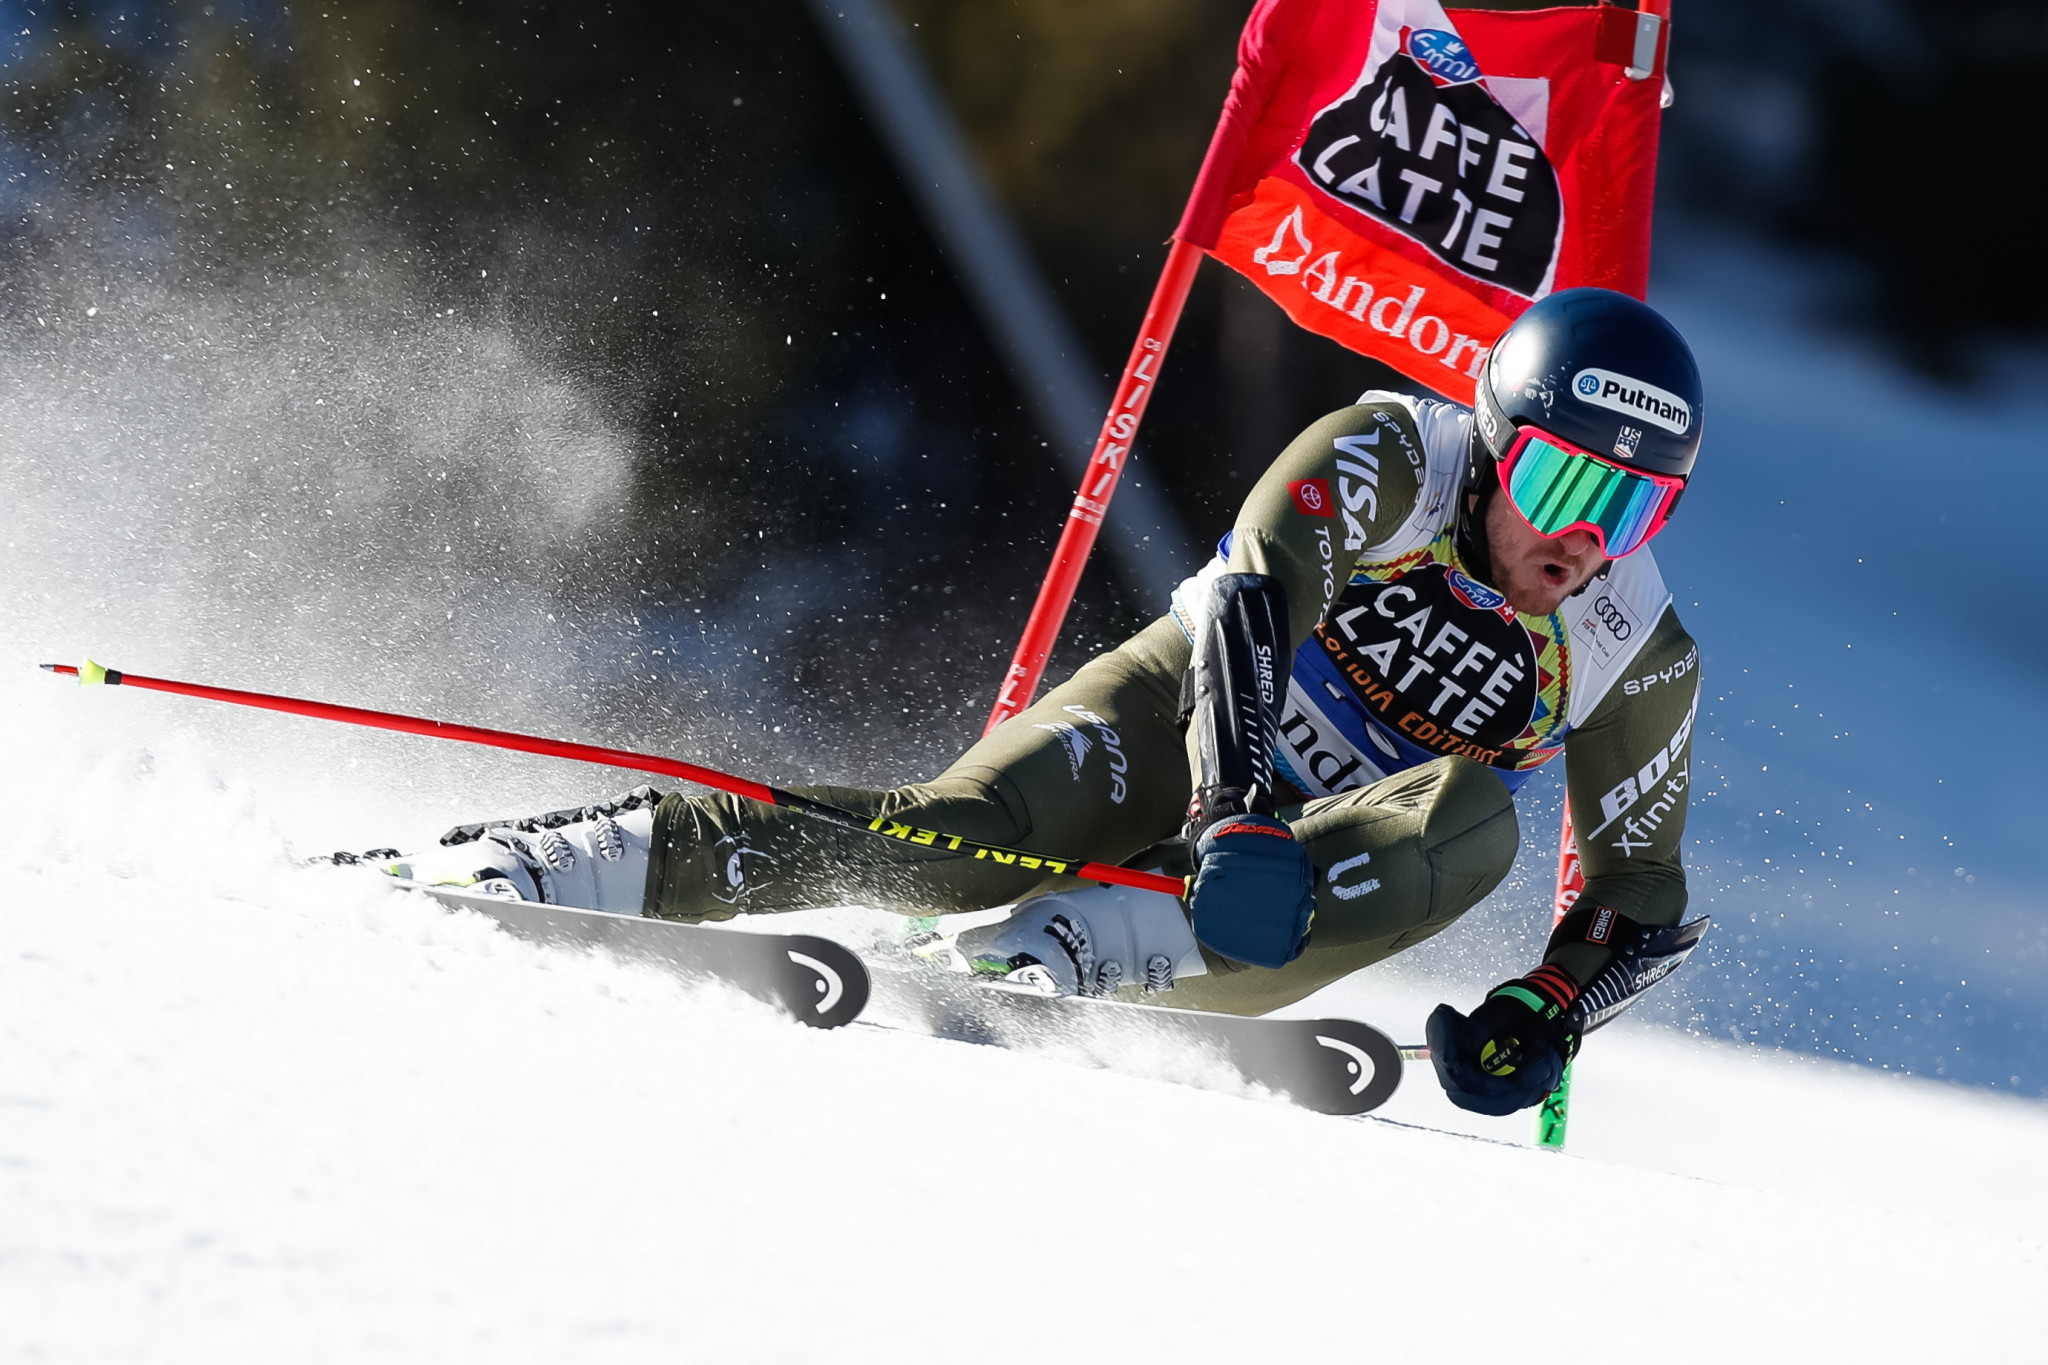 Double Olympic skiing champion Ligety to focus solely on giant slalom